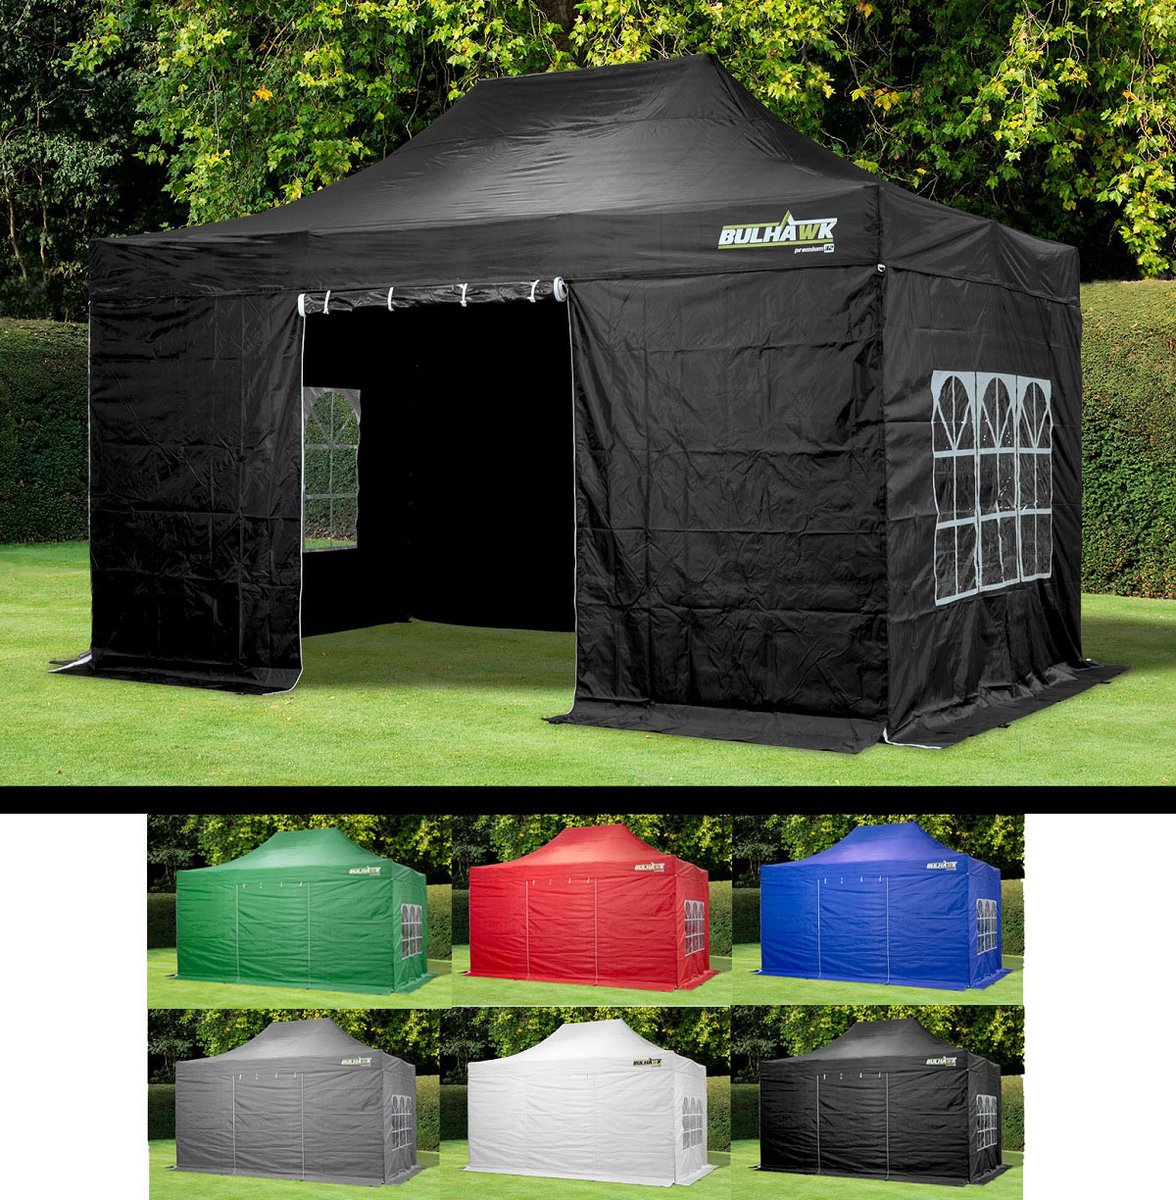 Bulhawks 3m x 4.5m Heavy Duty Pop Up Gazebo is our No1 best seller  5 🌟 rated by our customers bit.ly/37xjZza #gazebo #popupgazebo #marquee #events #gardenparty